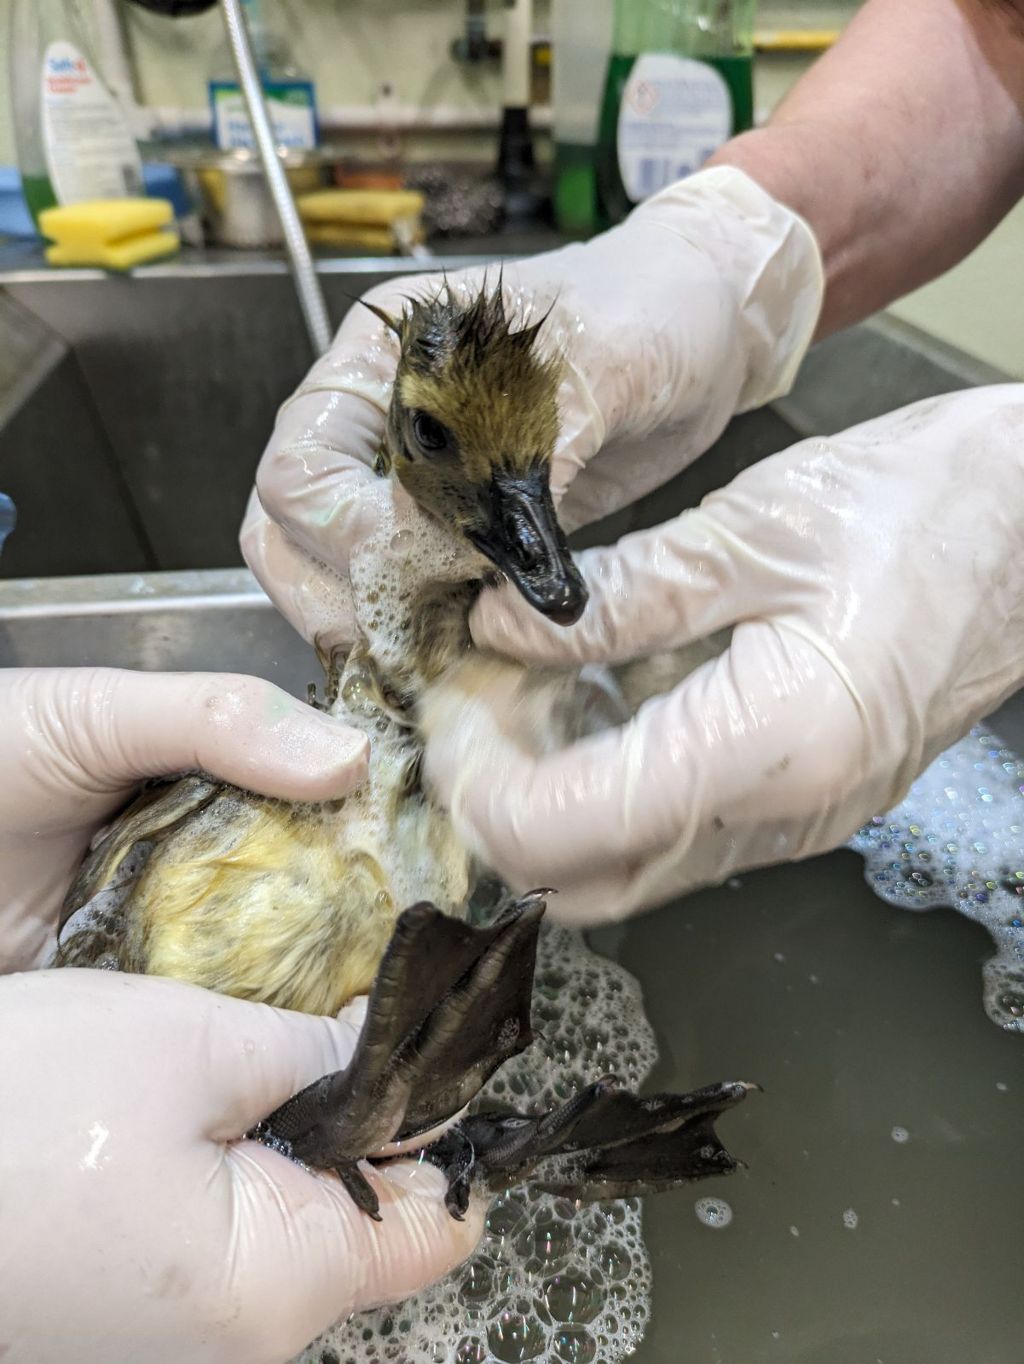 A gosling being bathed to removed oil from its feathers